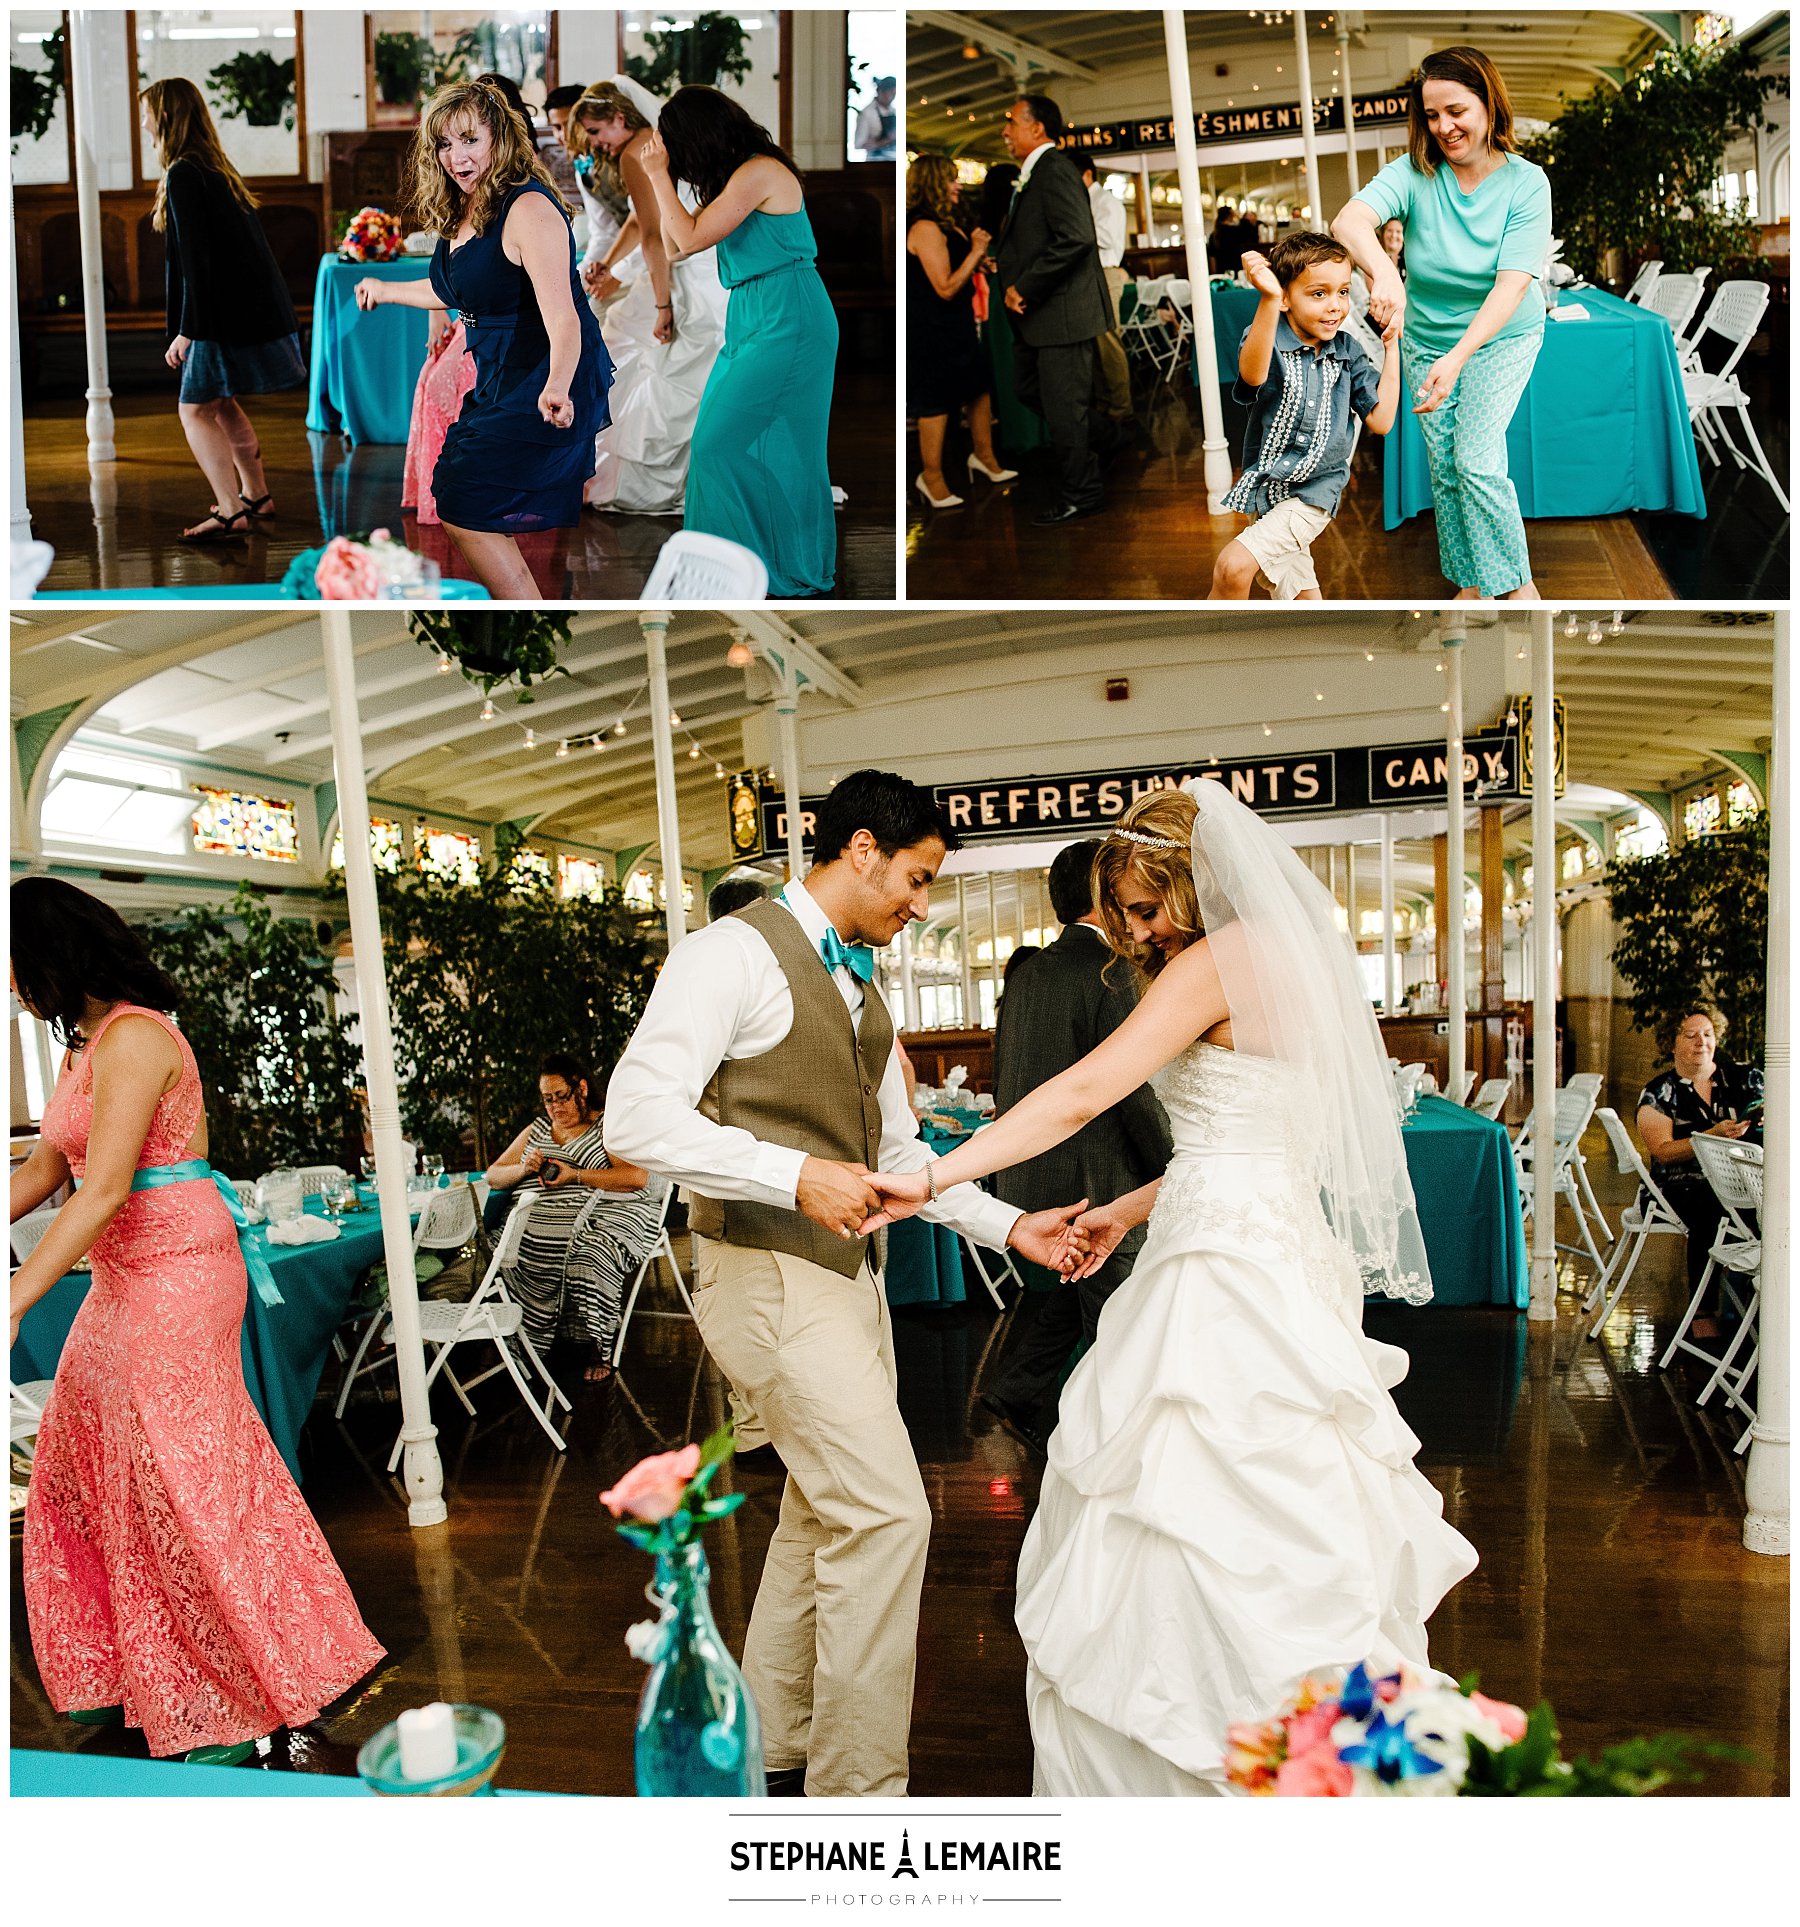 San Diego Wedding Session-Reception at Maritime Museum- On the dancefloor